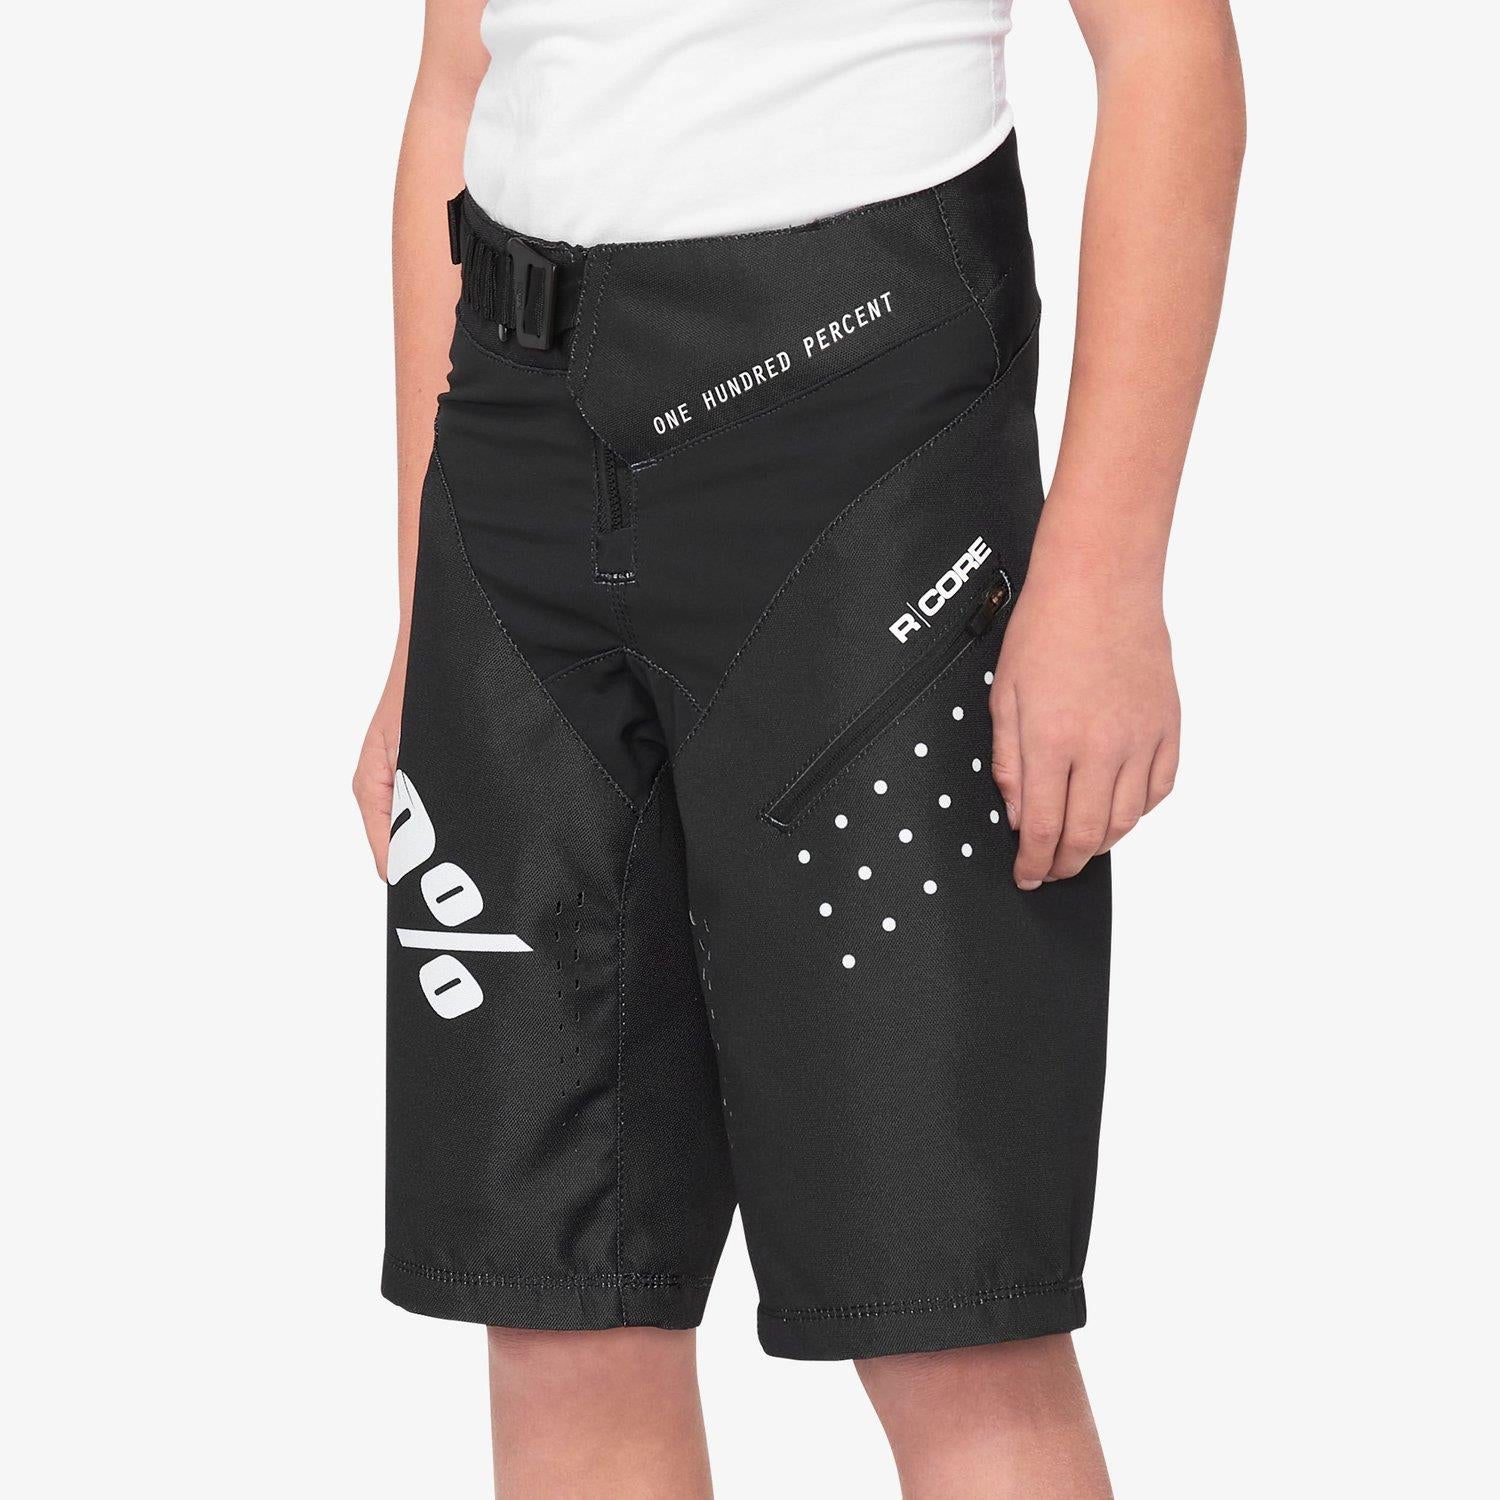 100% R-Core Race Youth Shorts - Black 26"